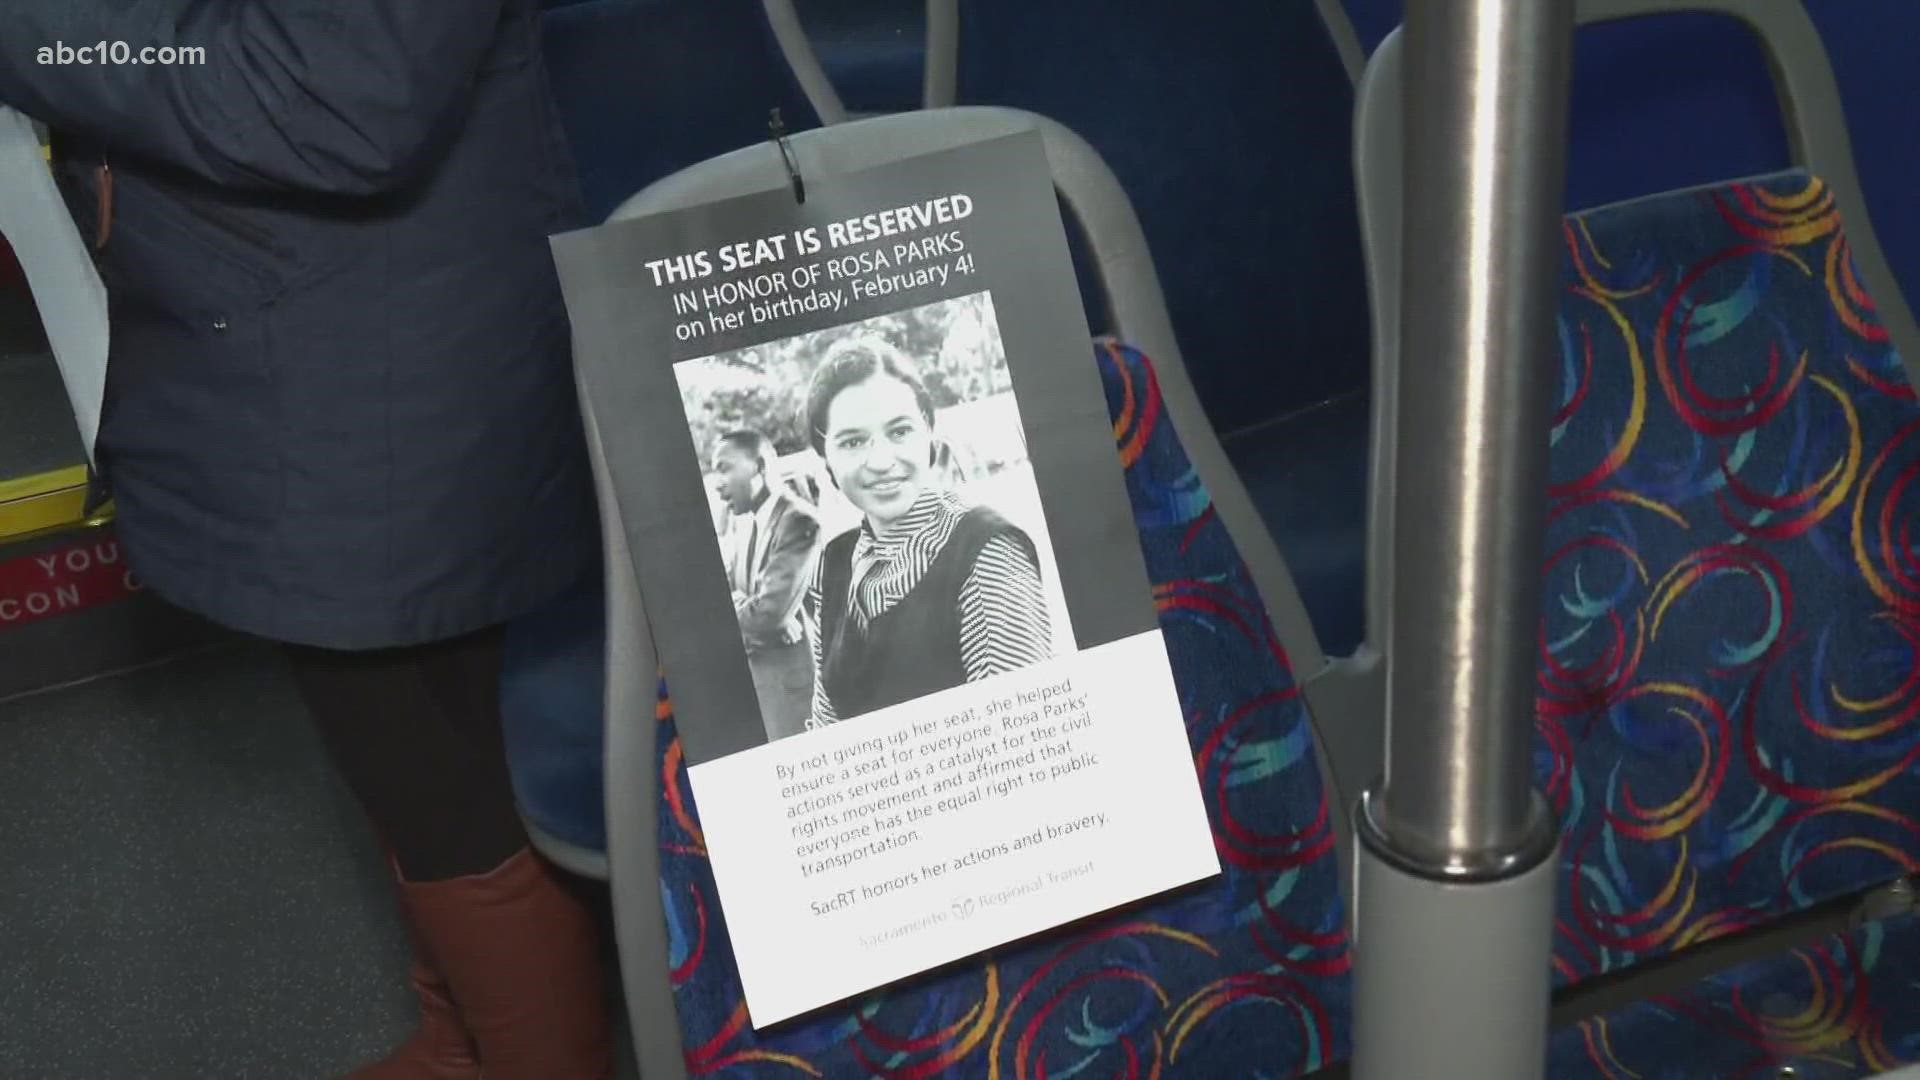 In honoring the birthday of civil rights leader Rosa Parks, Sacramento RT is offering free rides Friday on all fixed route buses. Details available on their website.